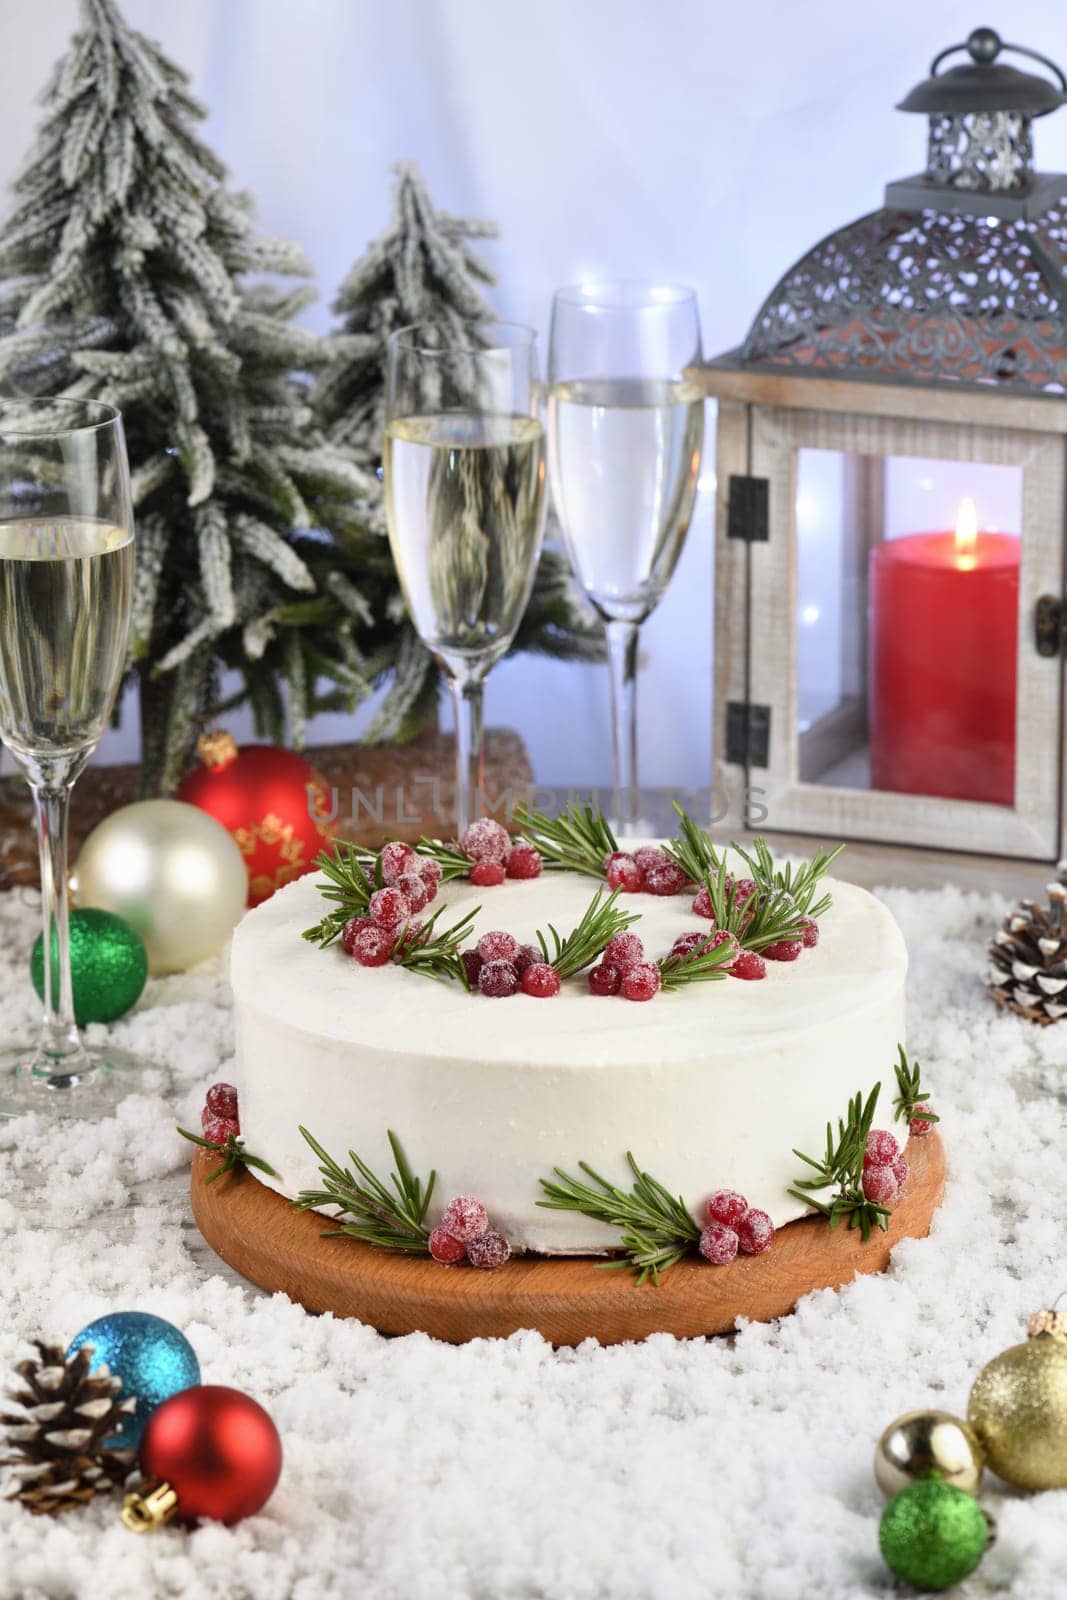 Cake for Christmas by Apolonia